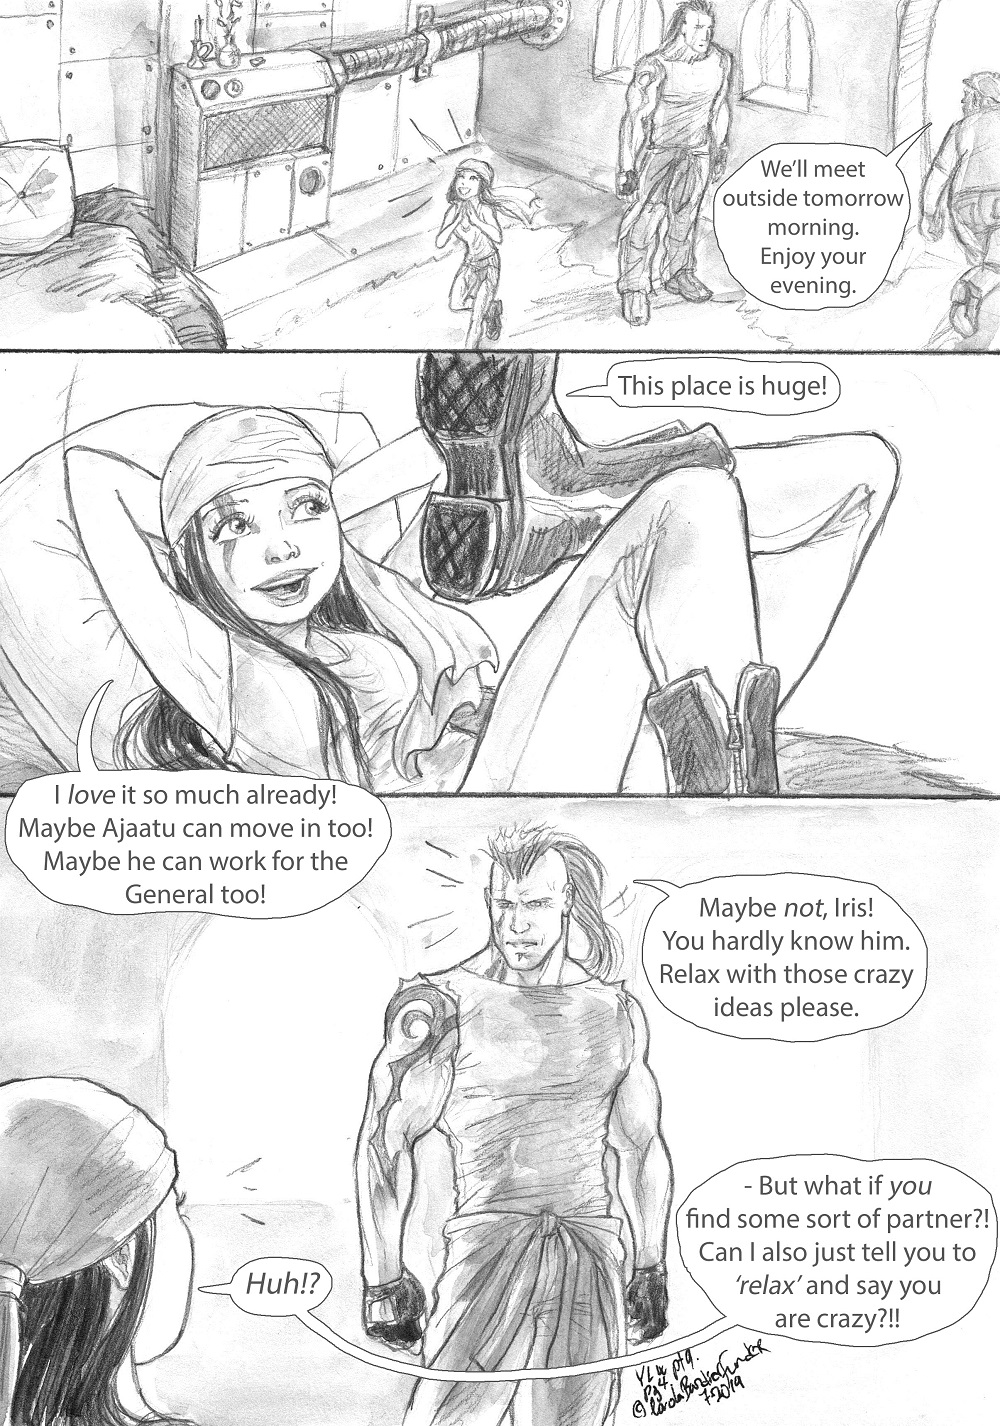 YLW_part9_A_Convenient_Coincidence_page4